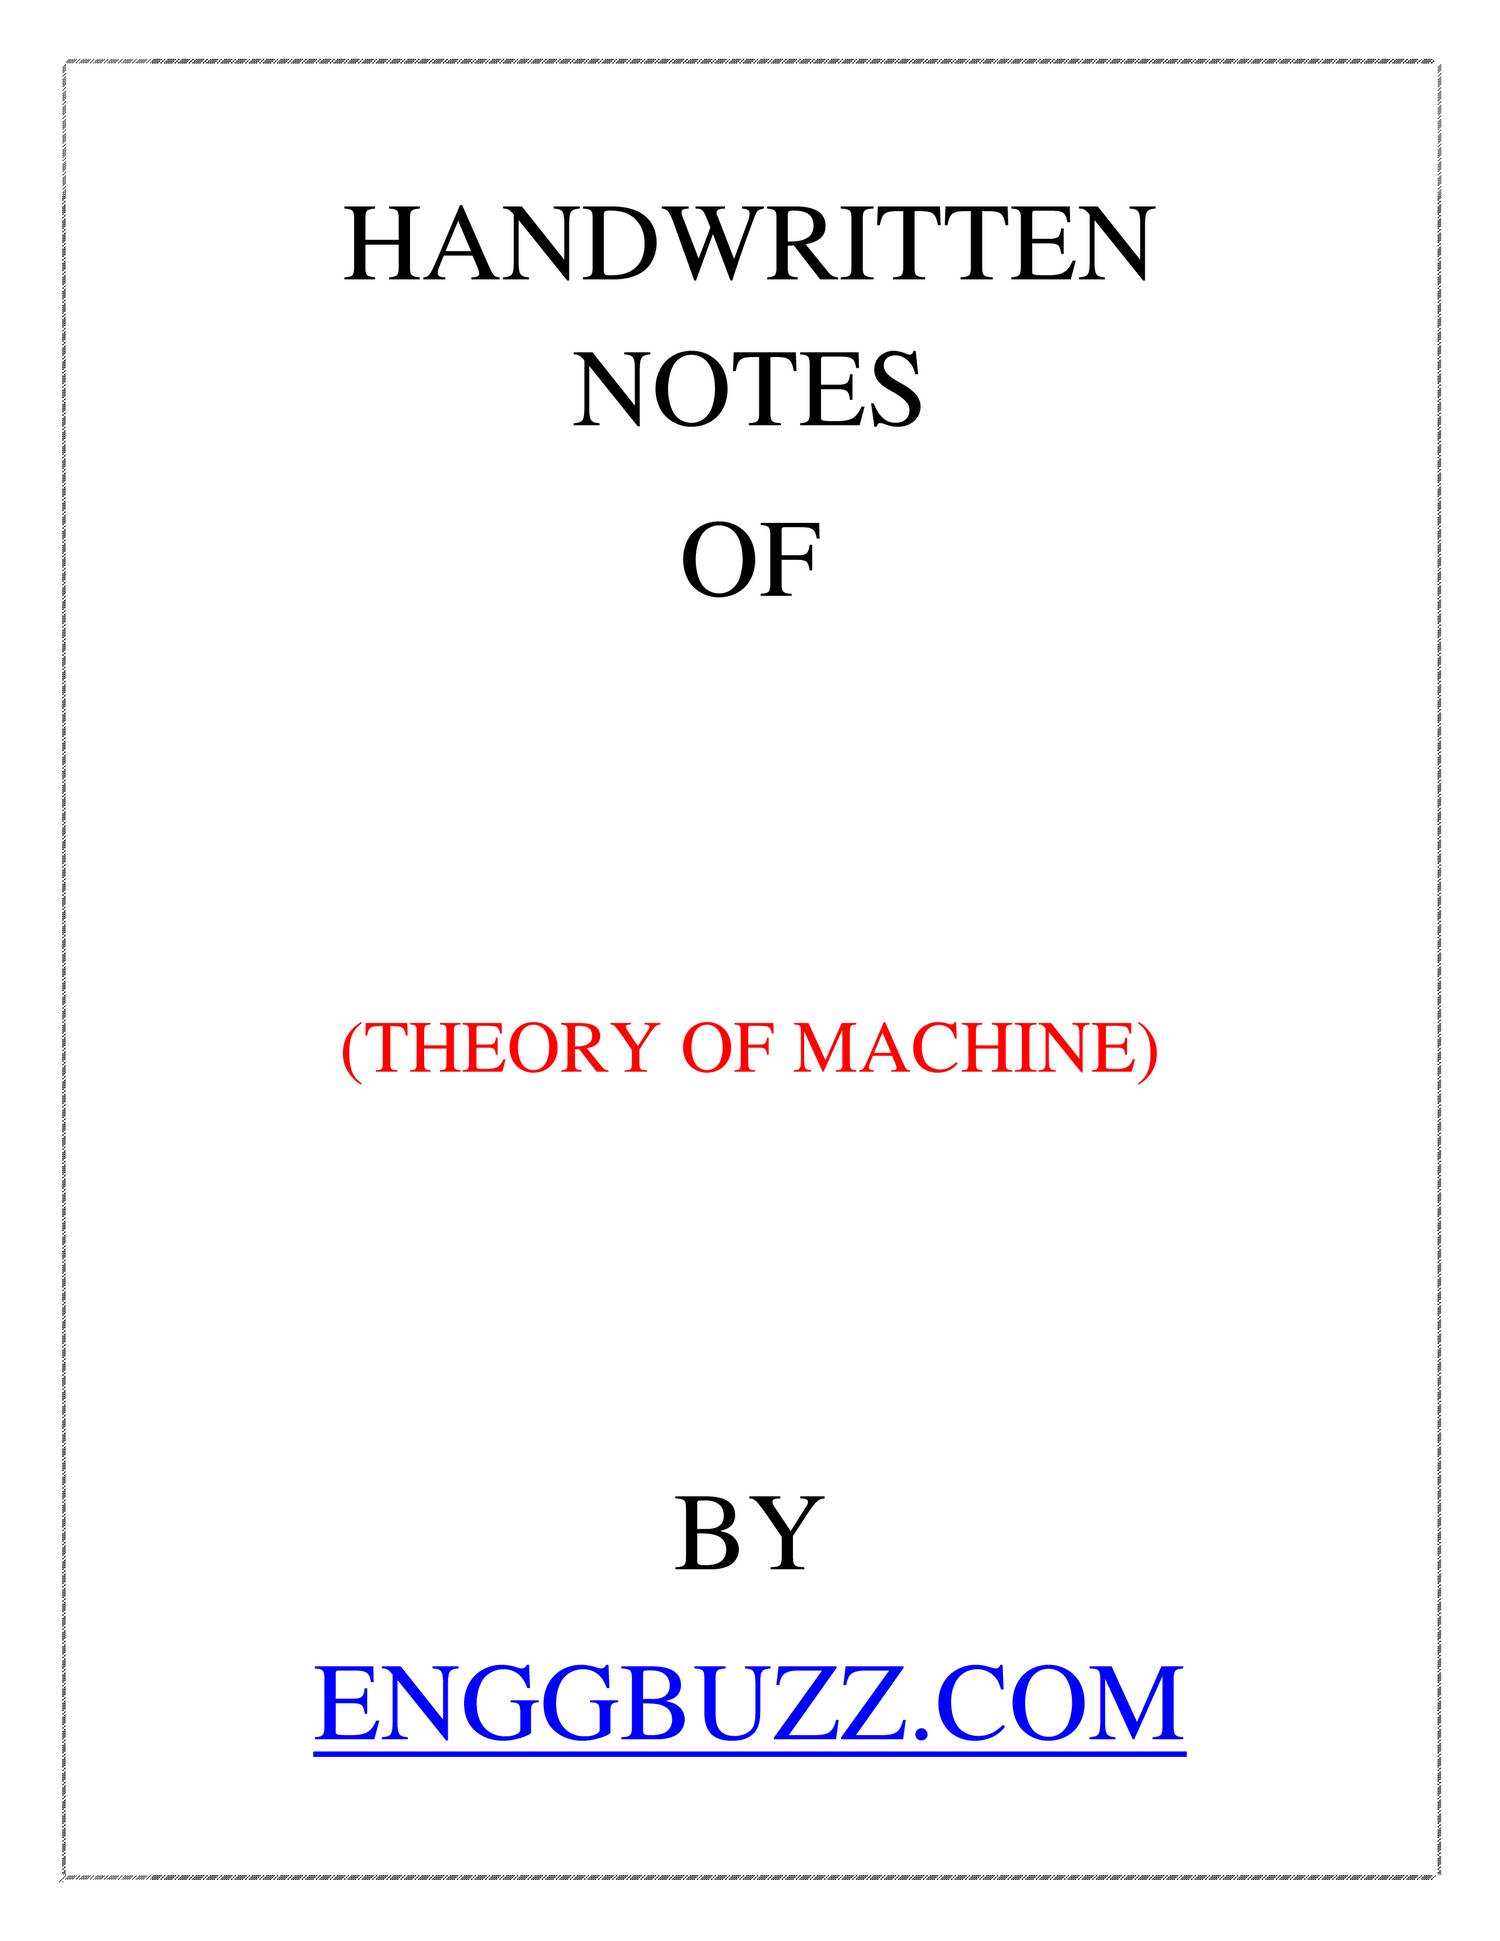 THEORY OF MACHINE DEEP STUDY NOTES BY ENGGBUZZ.pdf | DocDroid